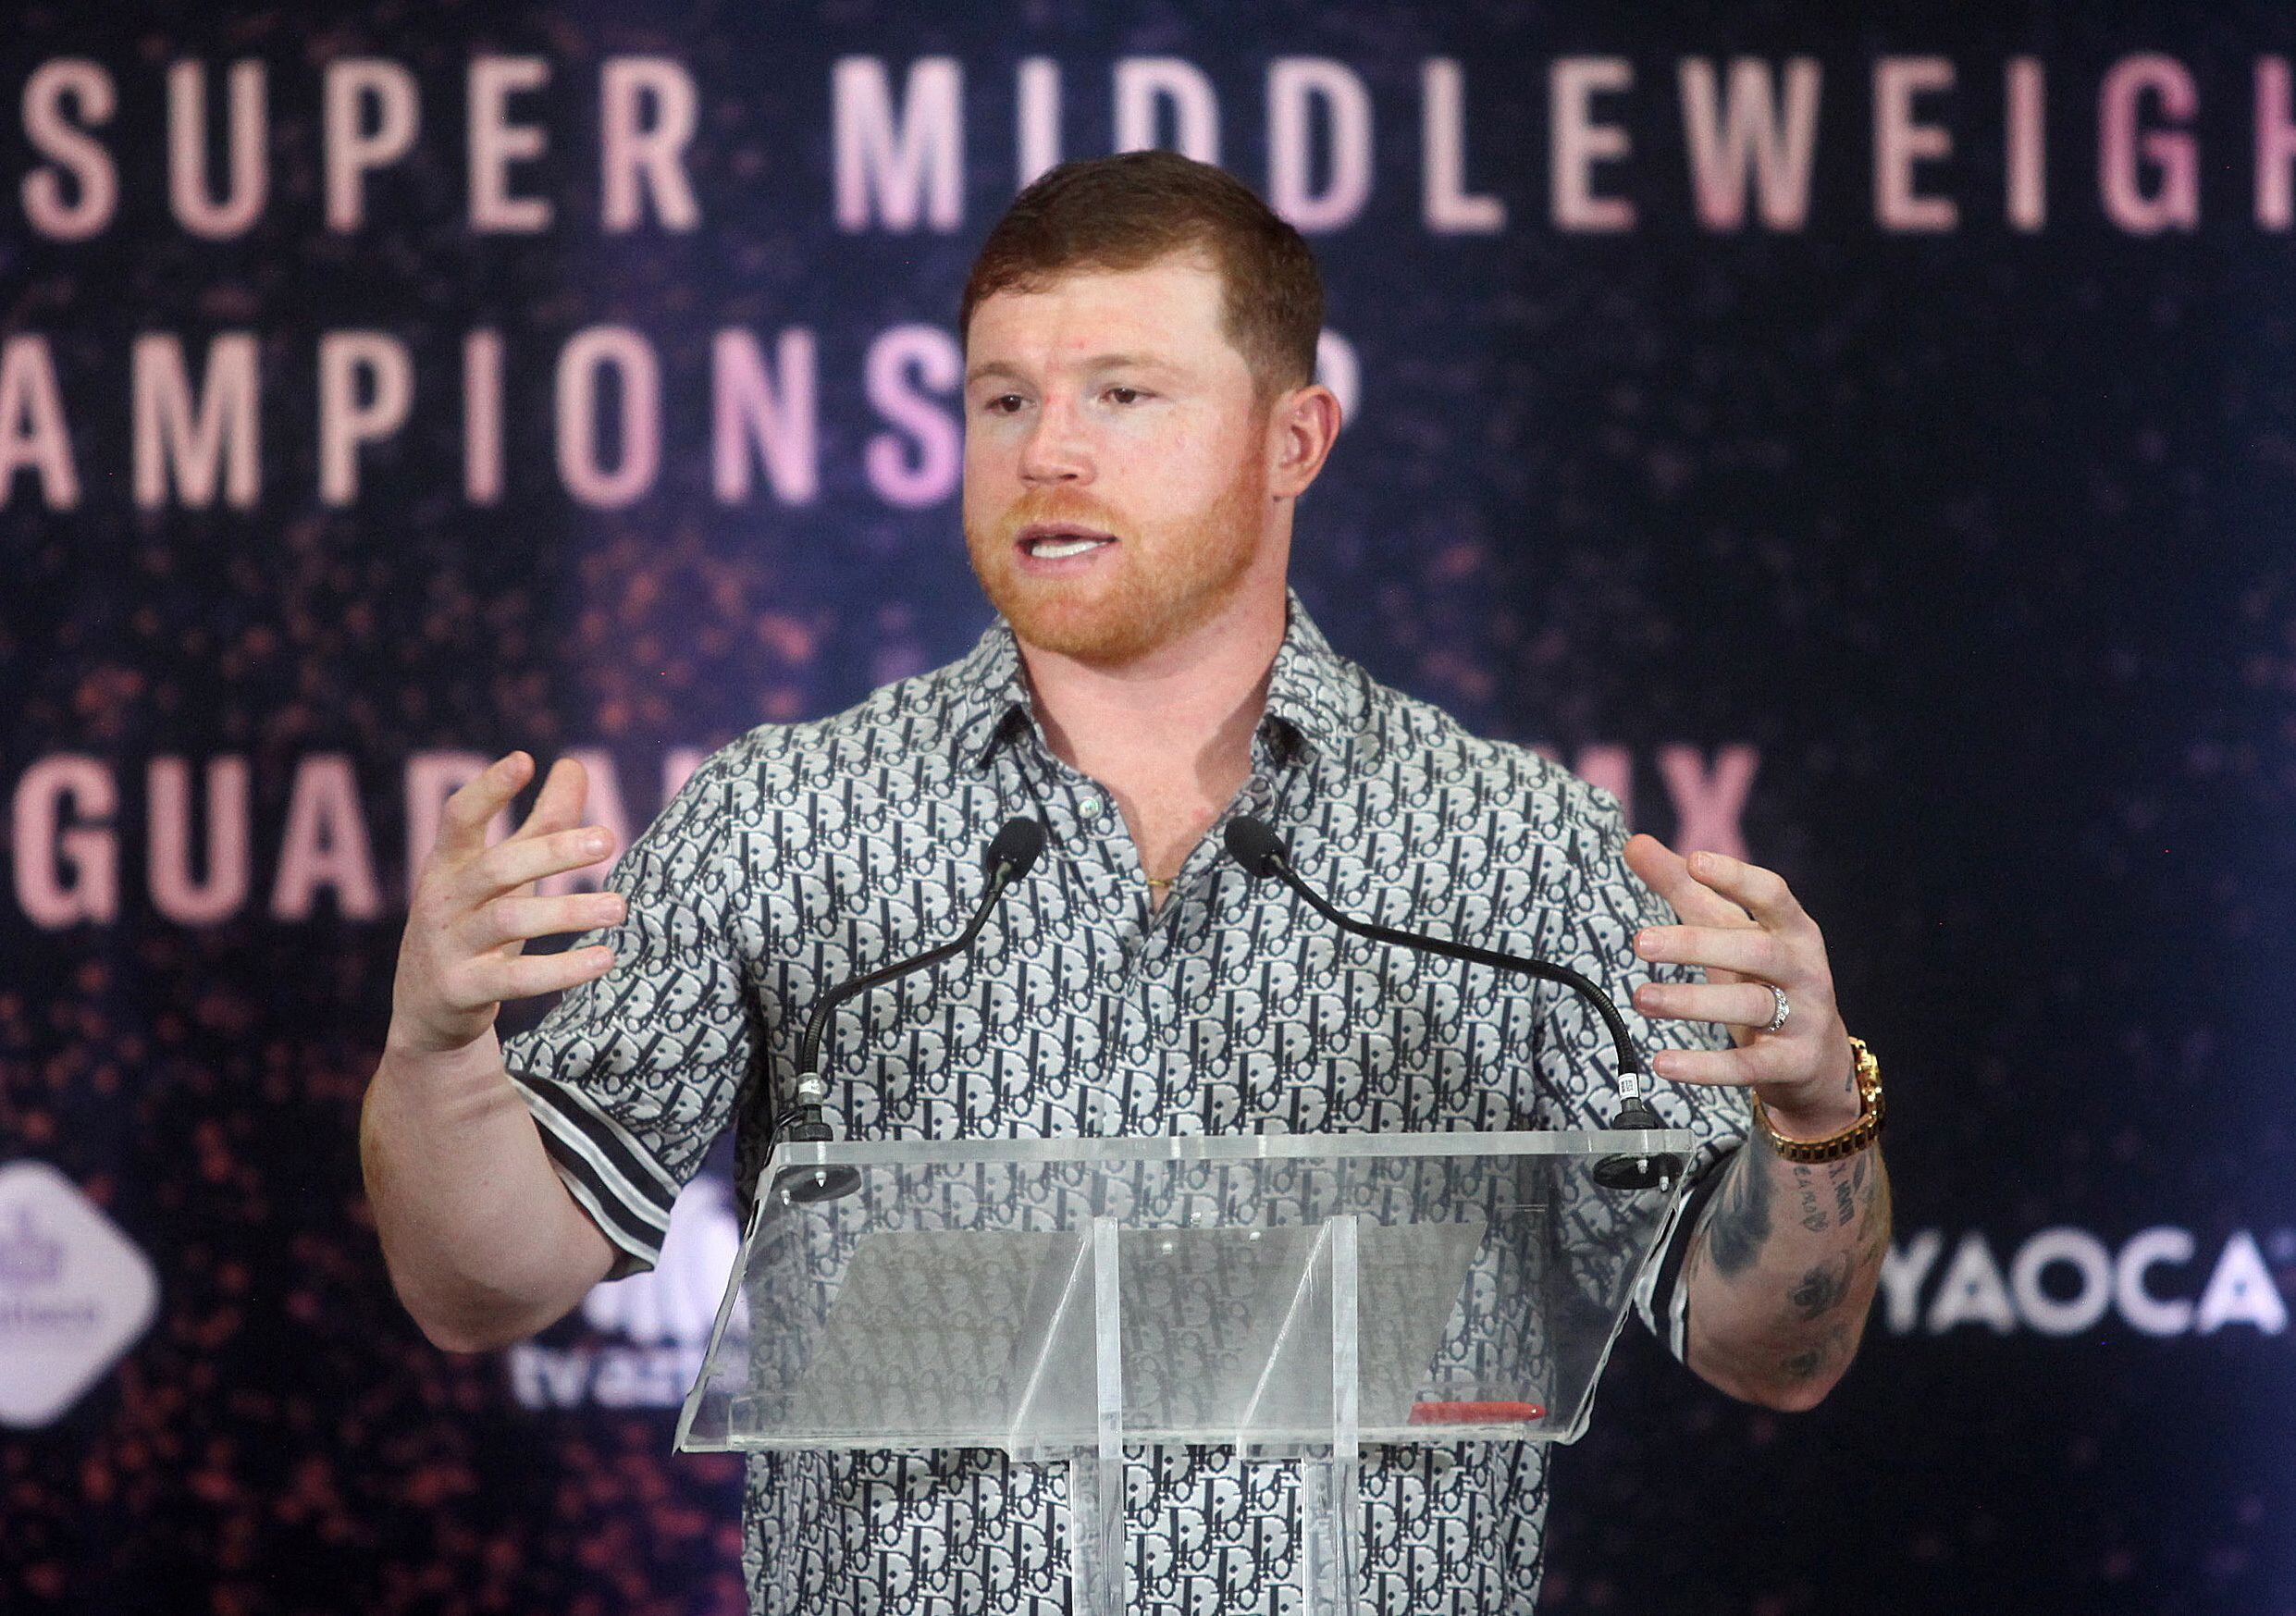 Boxing - 'Canelo' Alvarez holds a news conference in his hometown - Estadio Akron, Guadalajara, Mexico - March 14, 2023 Saul 'Canelo' Alvarez during the press conference about his fight against John Ryder on May 6 in Guadalajara for the super middleweight championship. REUTERS/Fernando Carranza